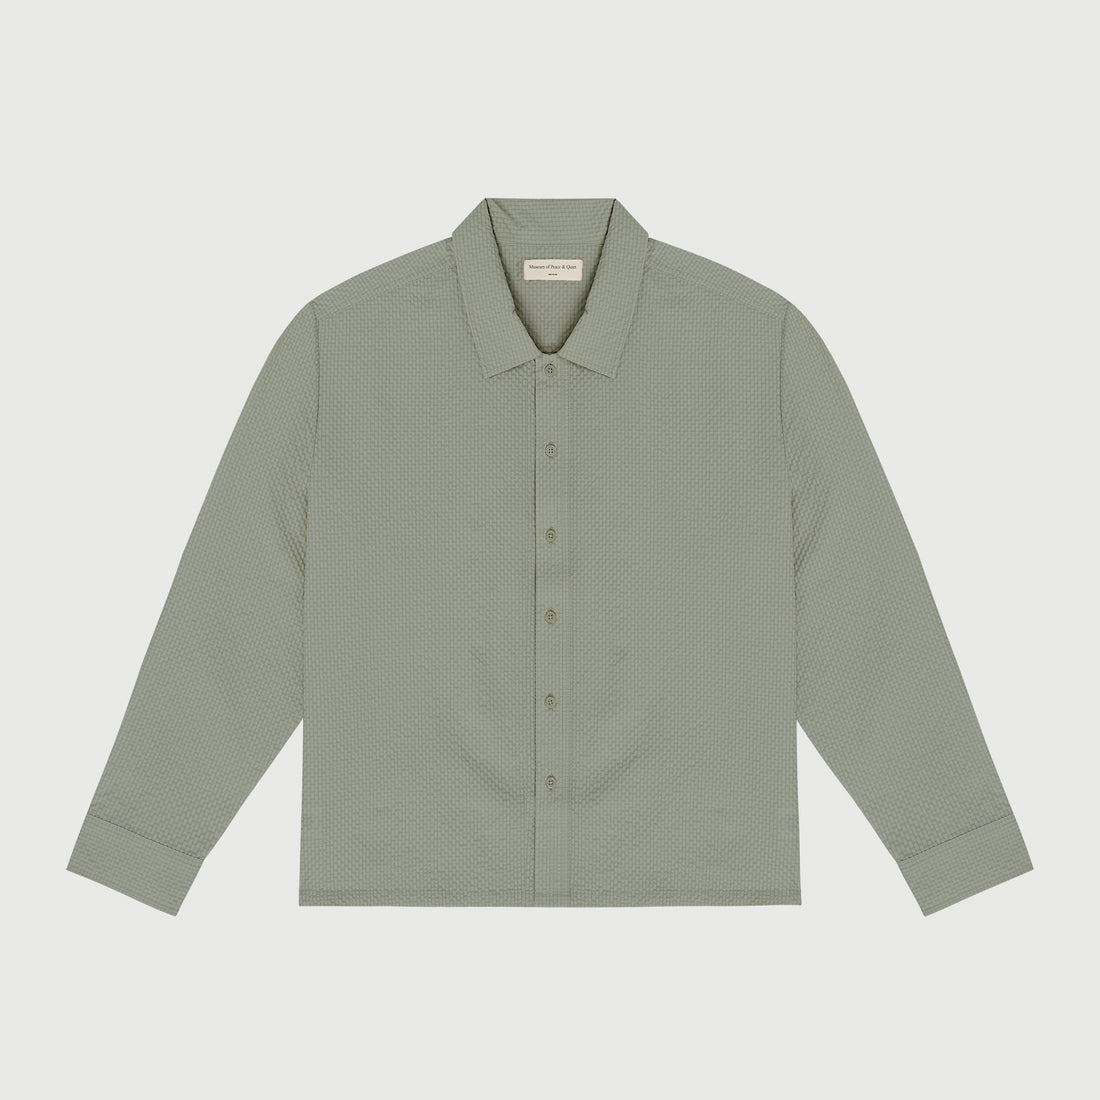 MUSEUM OF PEACE AND QUIET -  VACATION BUTTON UP SHIRT - OLIVE